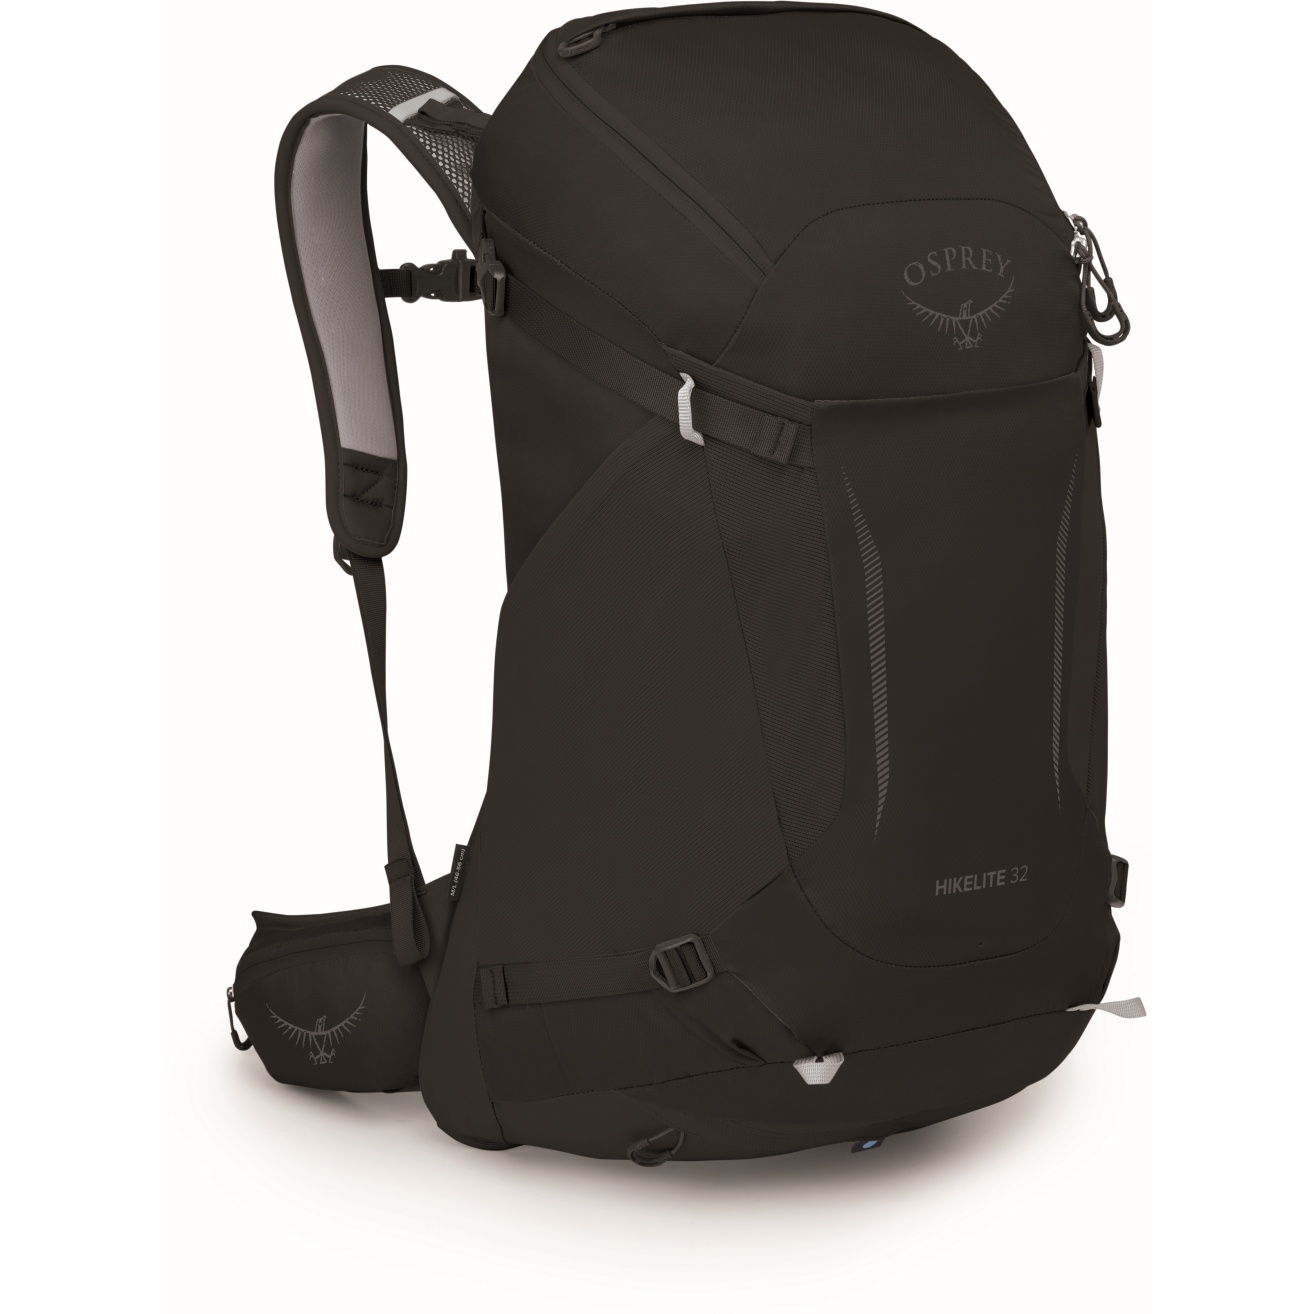 Picture of Osprey Hikelite 32 Backpack - Black - S/M